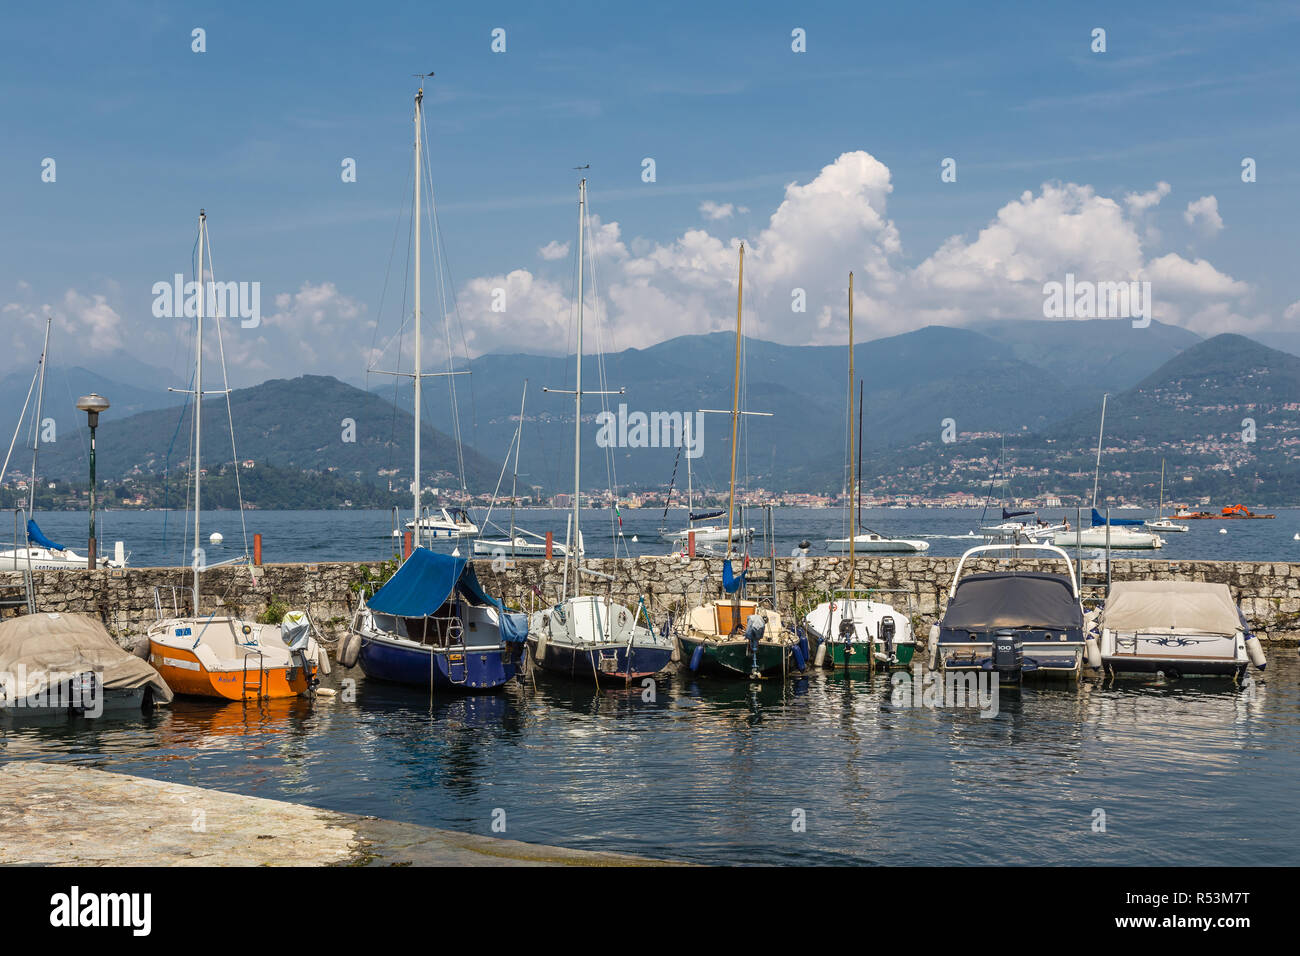 Cerro, Lombardy, Italy, July 15, 2013: Yachts in the marina on Lake Maggiore, with mountains in the background. Stock Photo